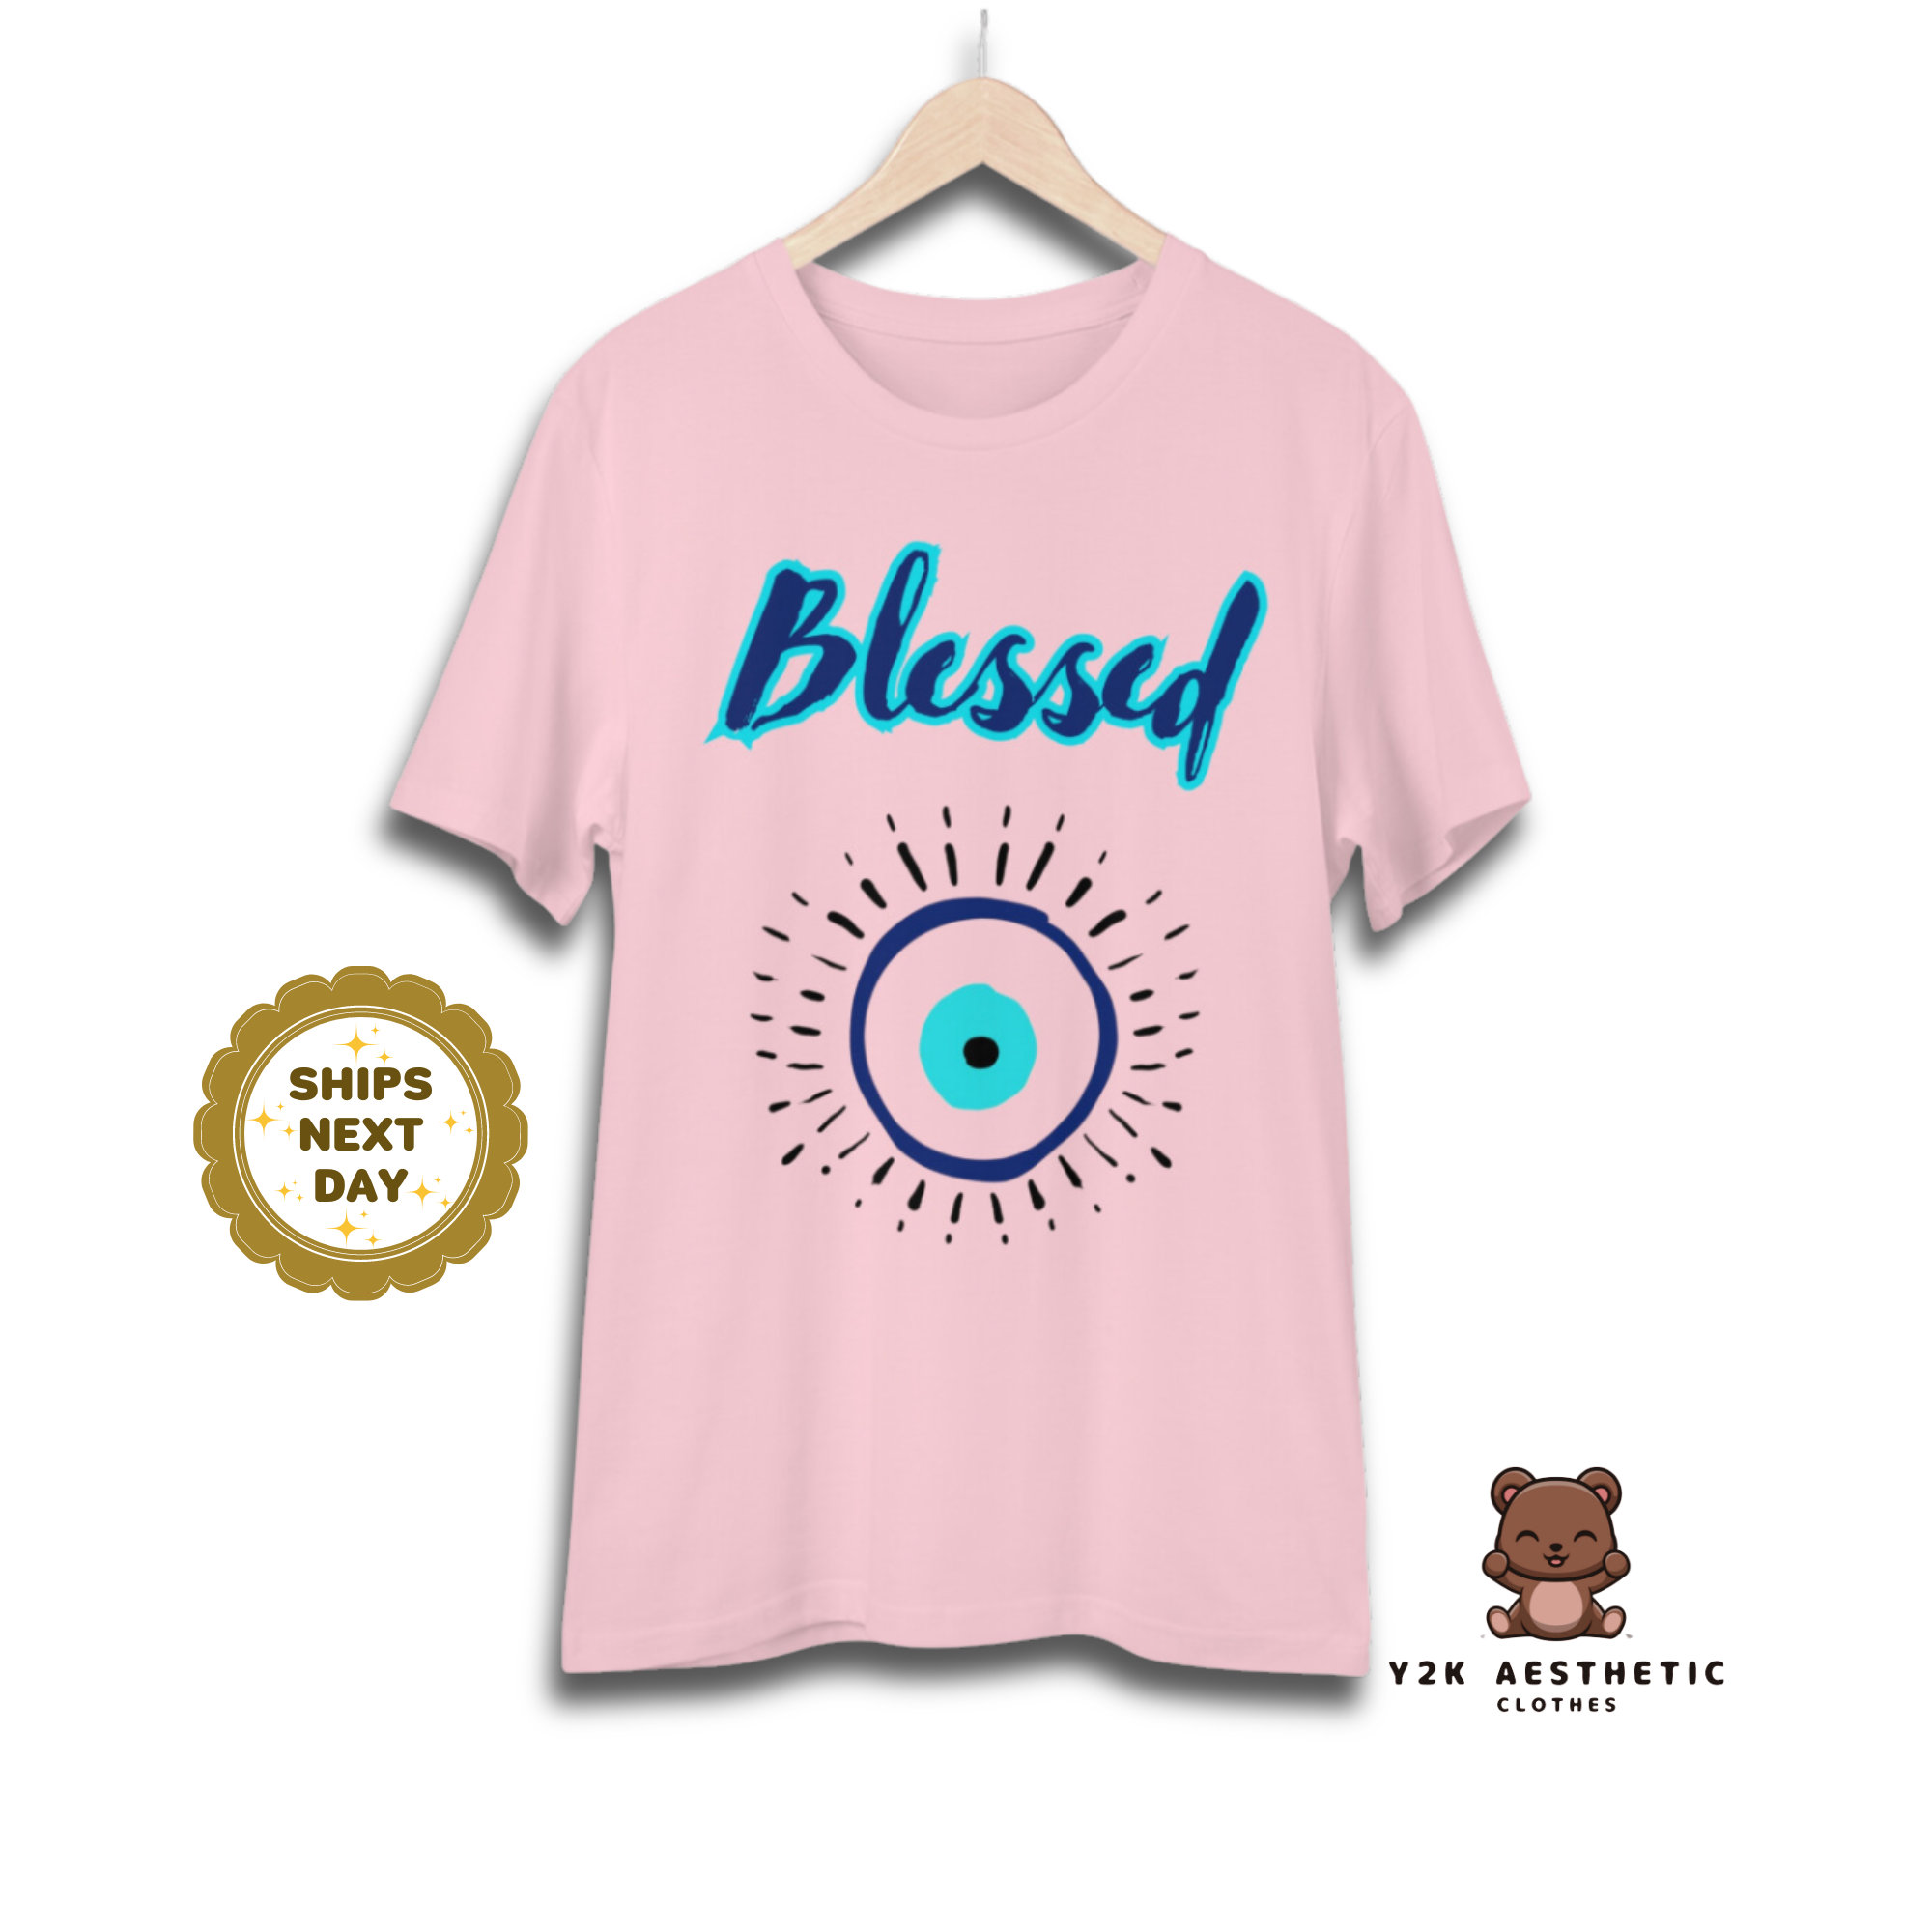 Blessed Graphic Shirt - Y2K Aesthetic Clothing